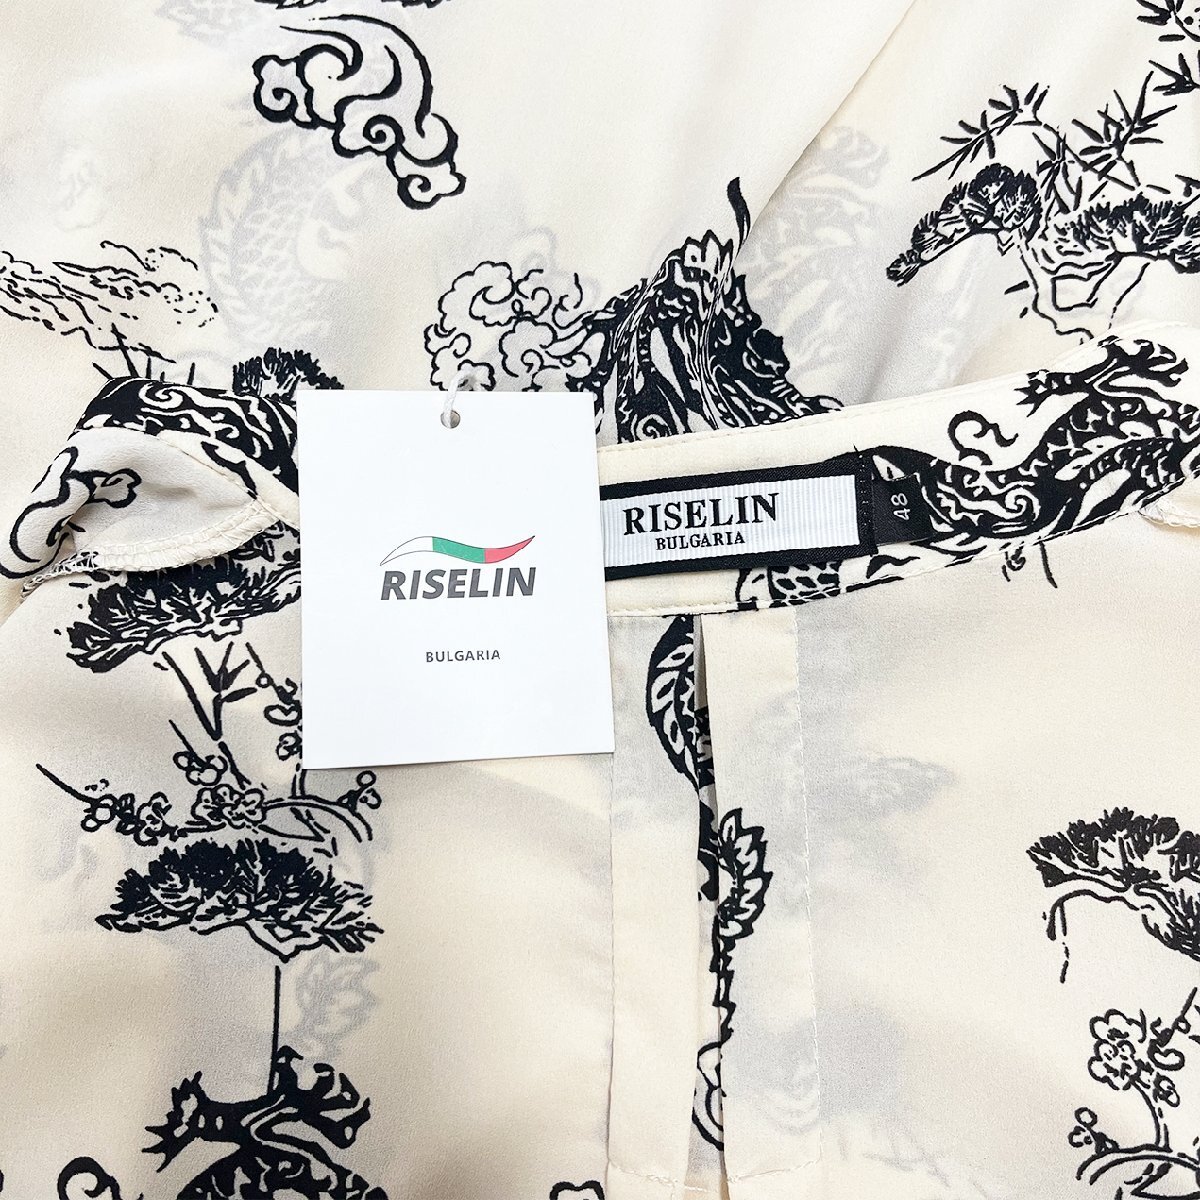  highest peak Europe made * regular price 4 ten thousand * BVLGARY a departure *RISELIN blouse high class silk . thin speed ... feeling easy dragon pattern put on .. lady's commuting XL